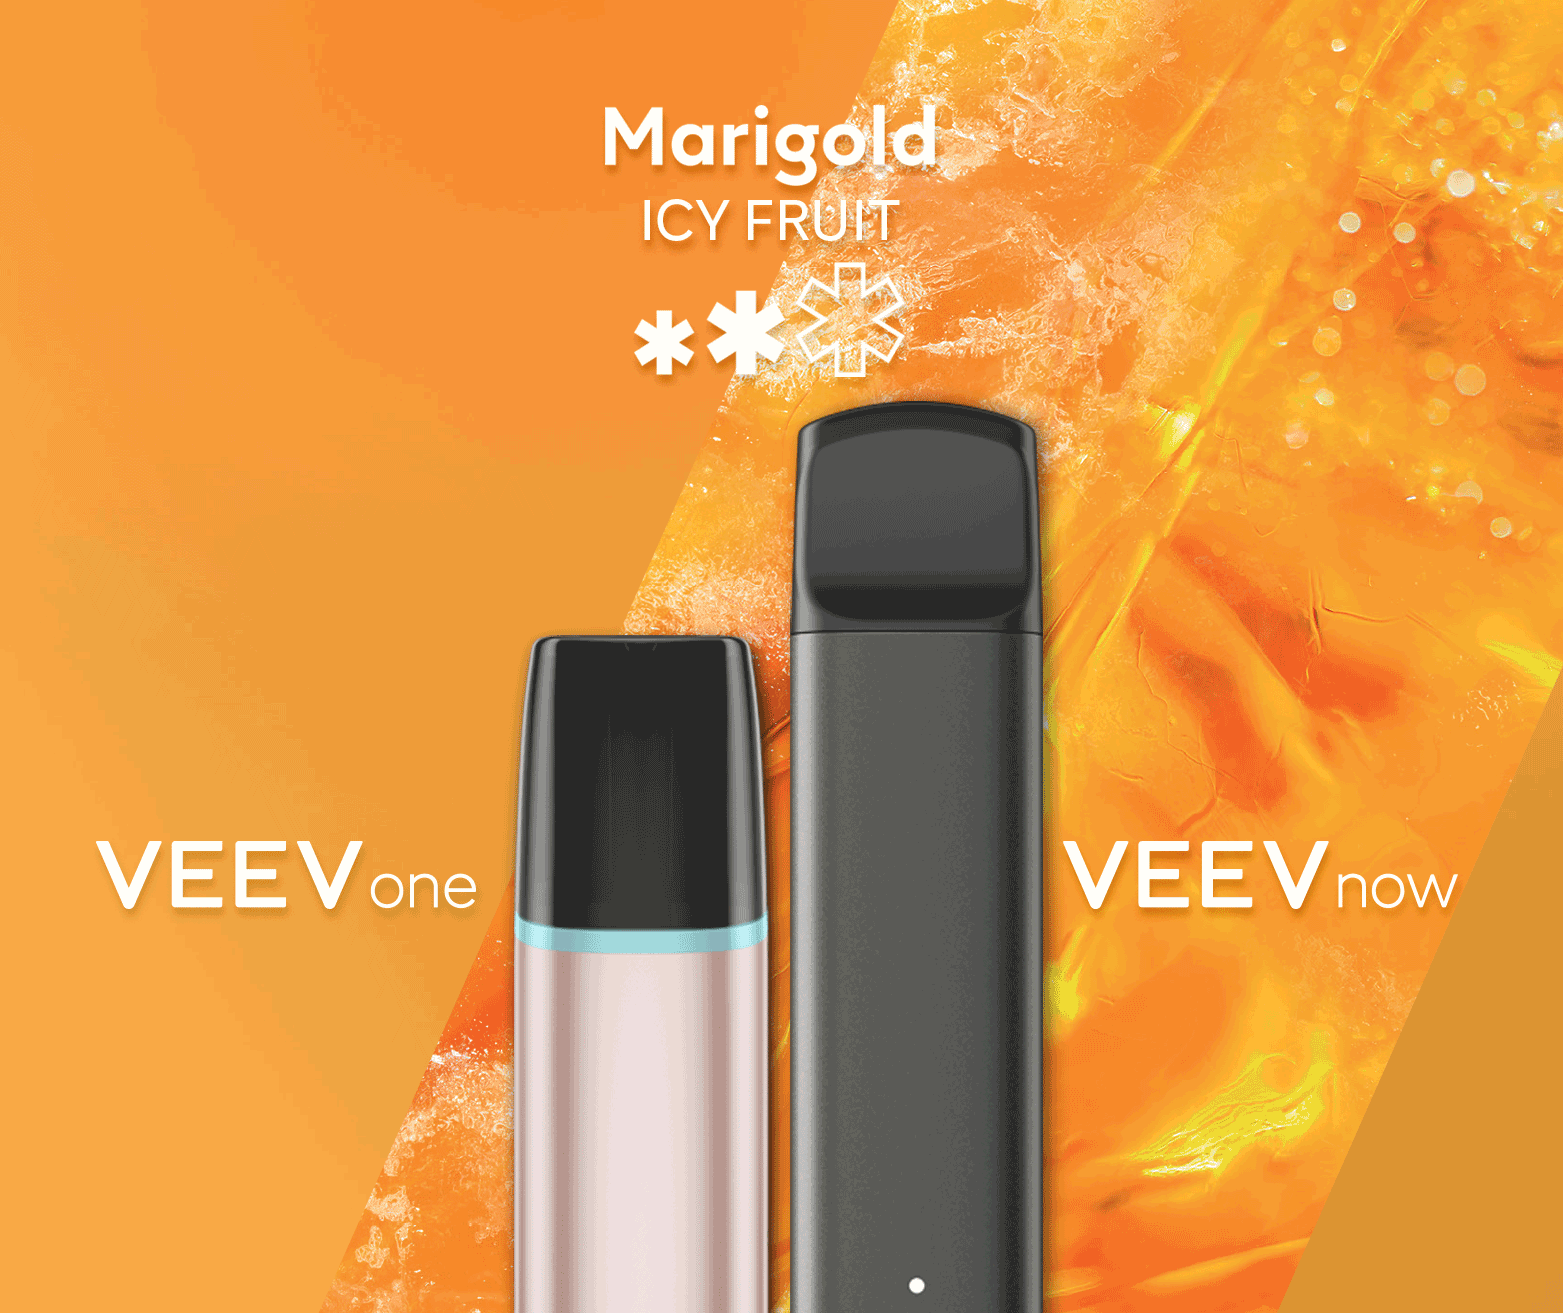 A VEEV ONE pod device and VEEV NOW disposable, both in Marigold flavour.